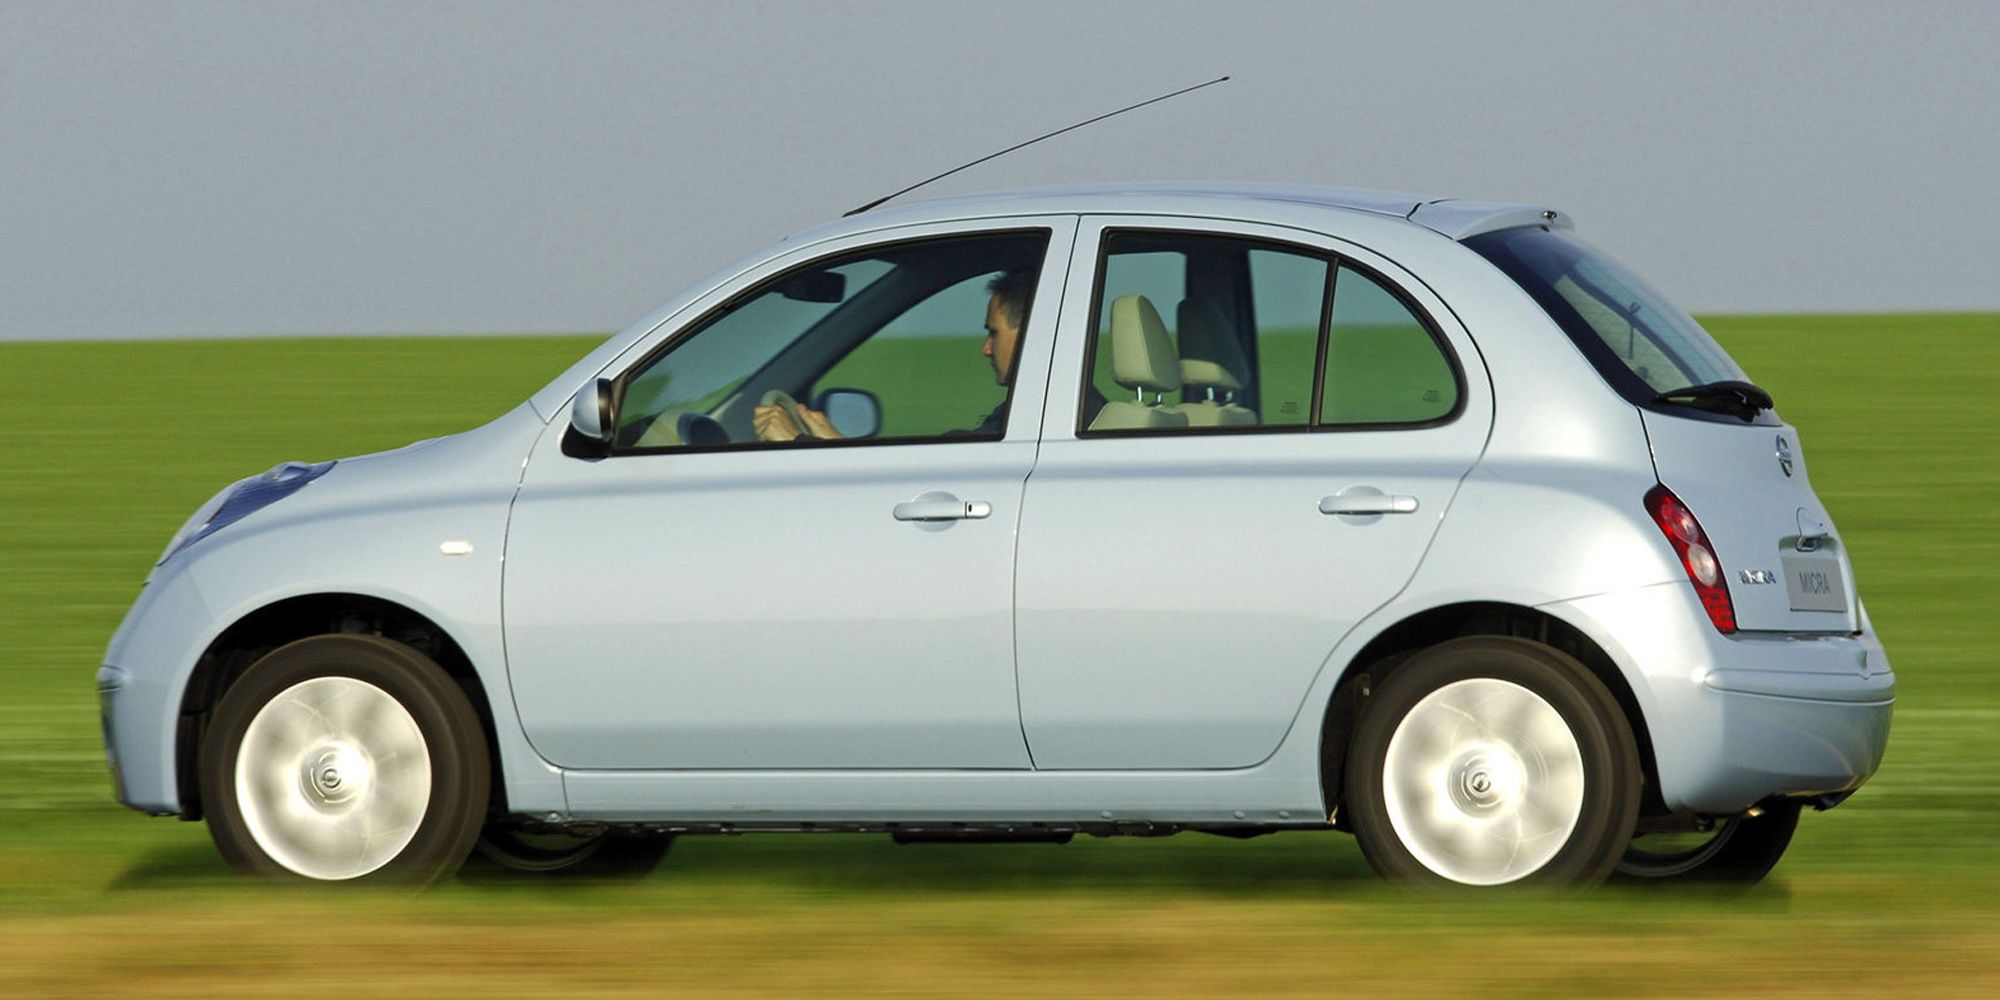 Rear 3/4 view of a sky blue Micra on the move